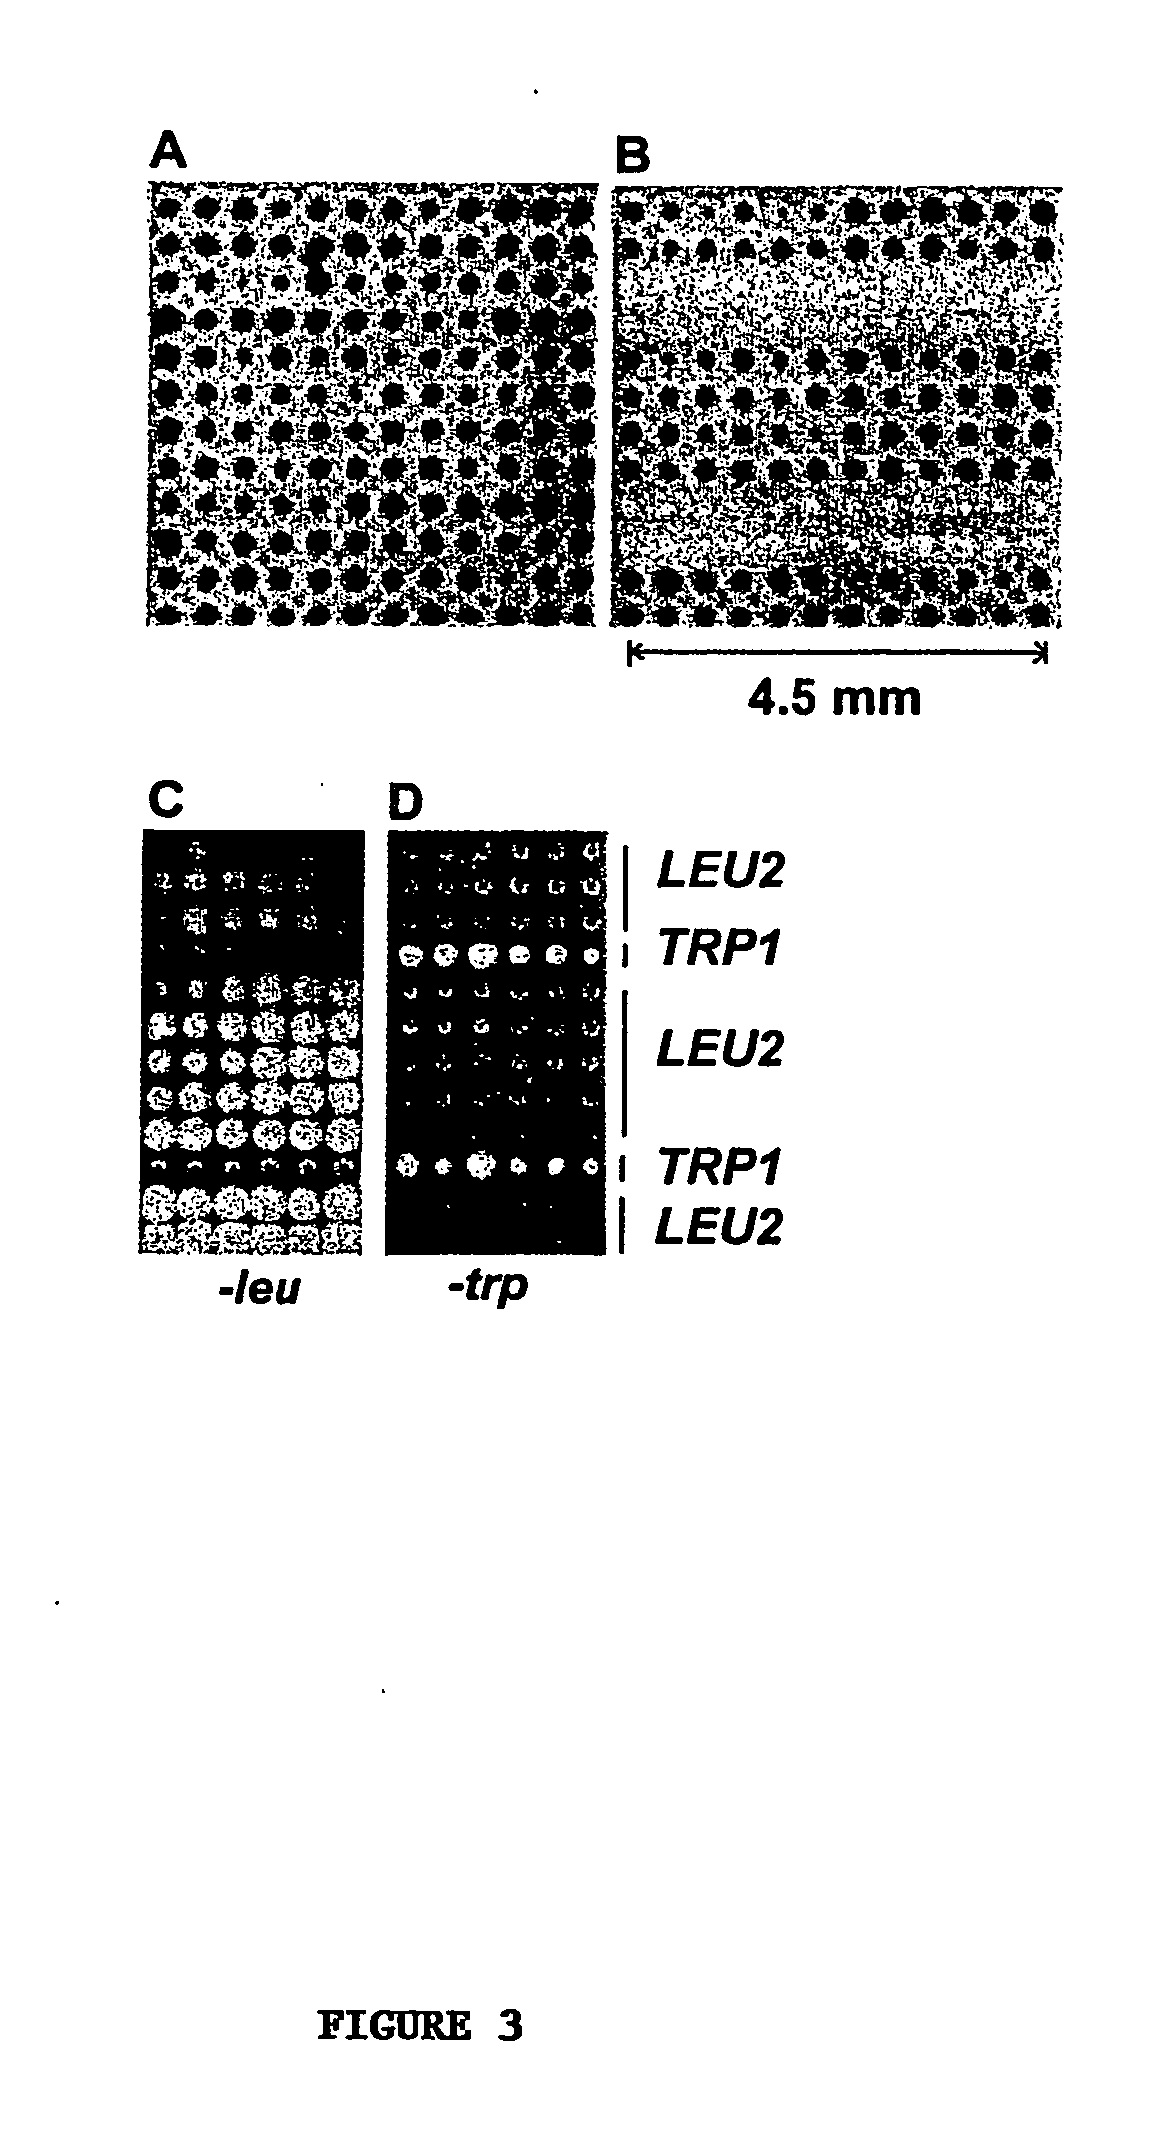 High-density cell microarrays for parallel functional determinations